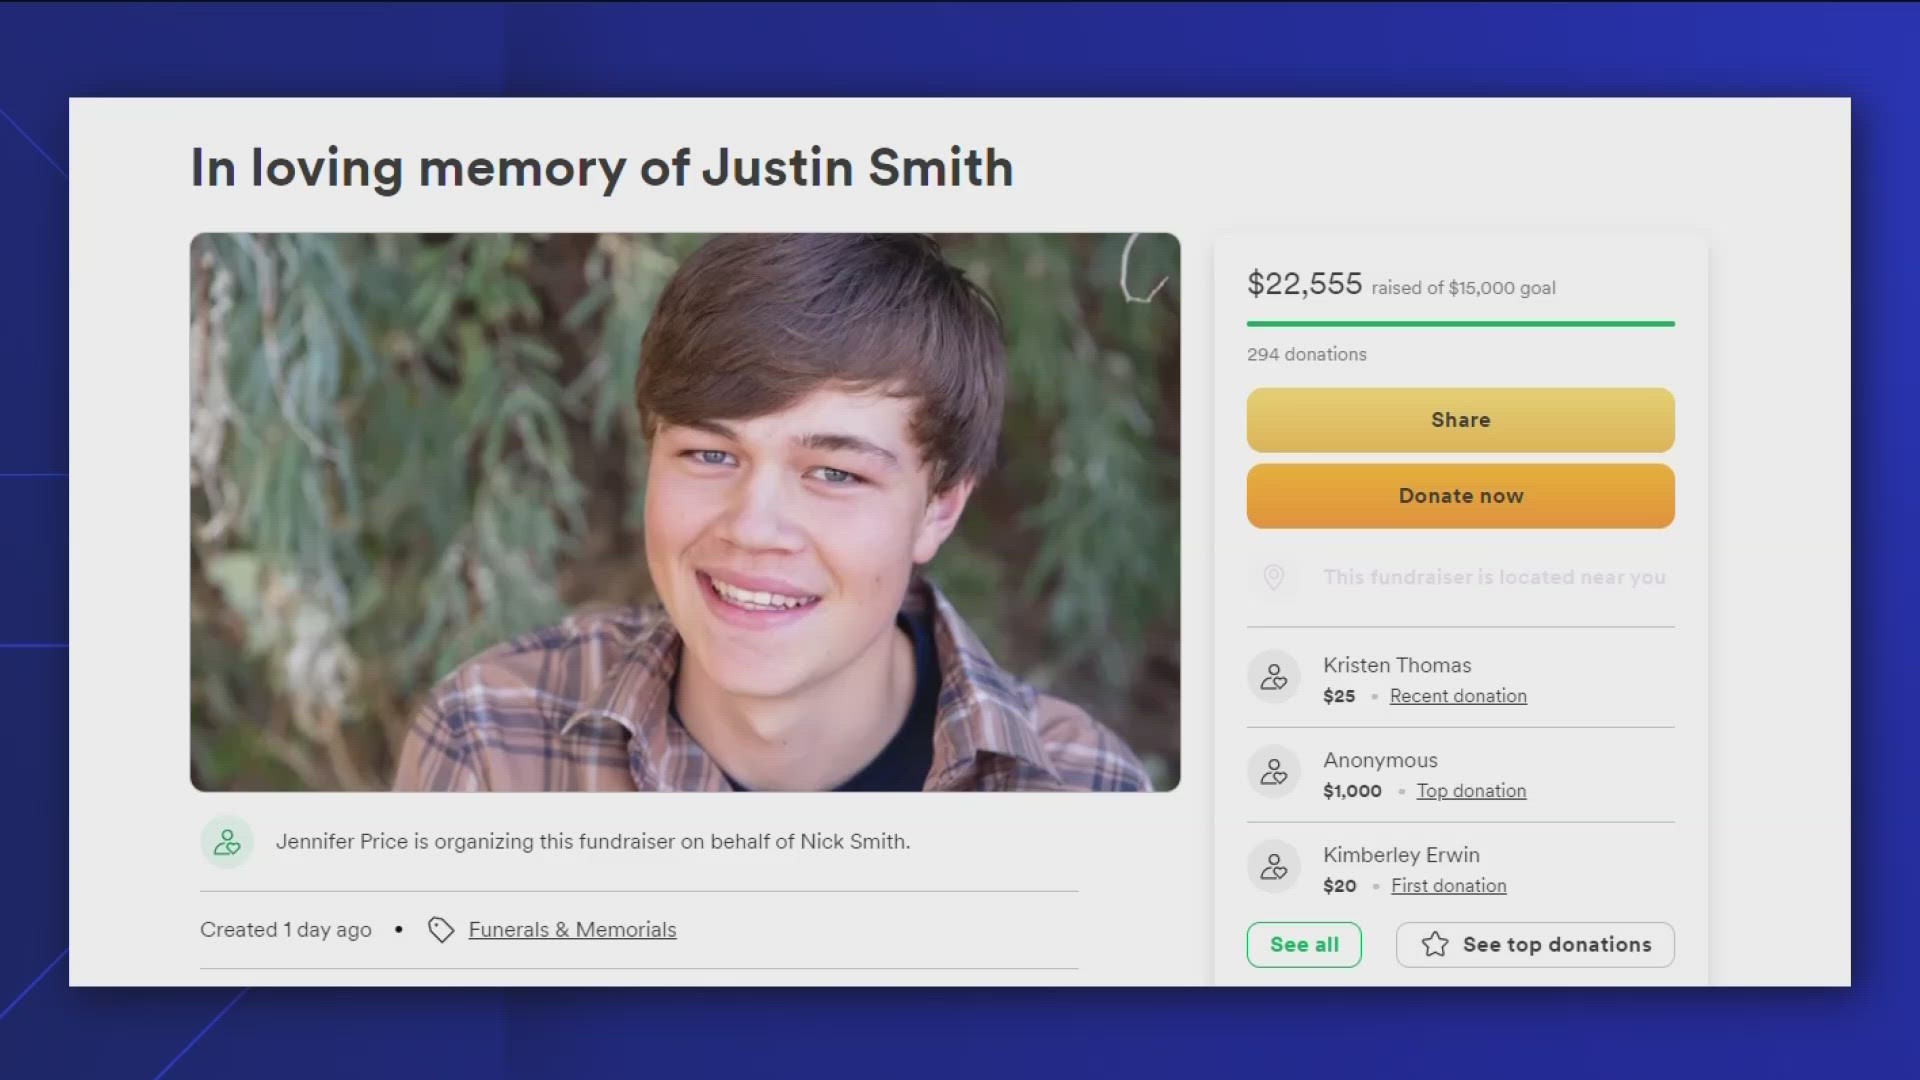 Link to support the Smith family: https://www.gofundme.com/f/in-loving-memory-of-justin-smith?utm_source=customer&utm_medium=copy_link&utm_campaign=p_cf+share-flow-1